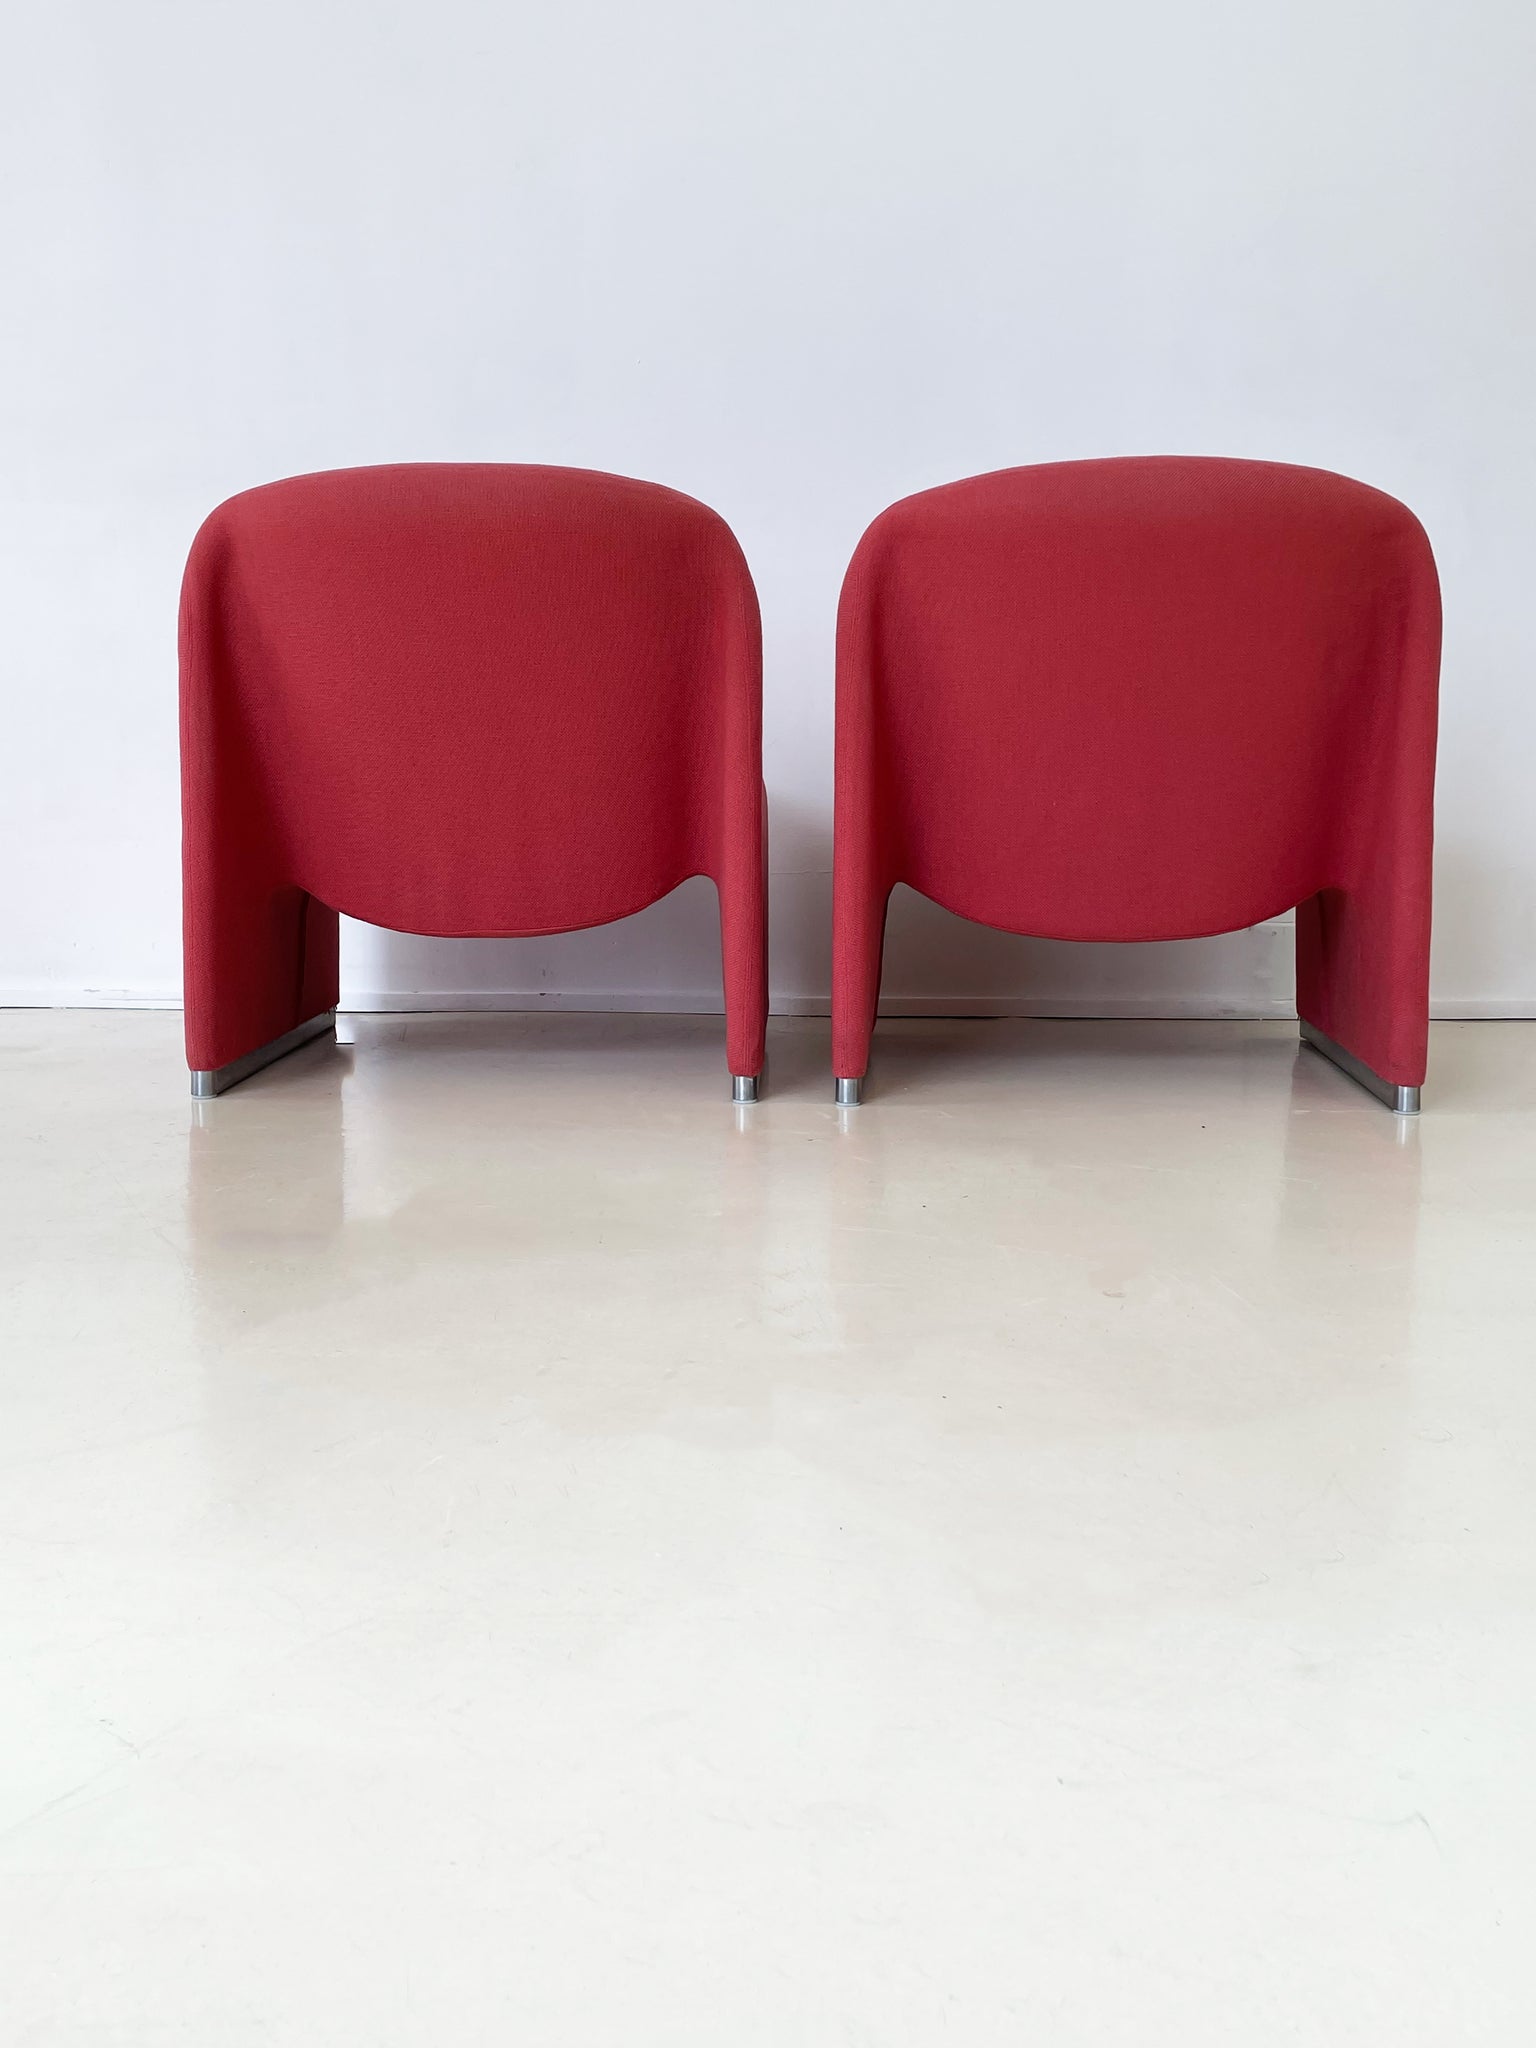 1970s Rose Alky Chair by Giancarlo Piretti for Castelli - Each